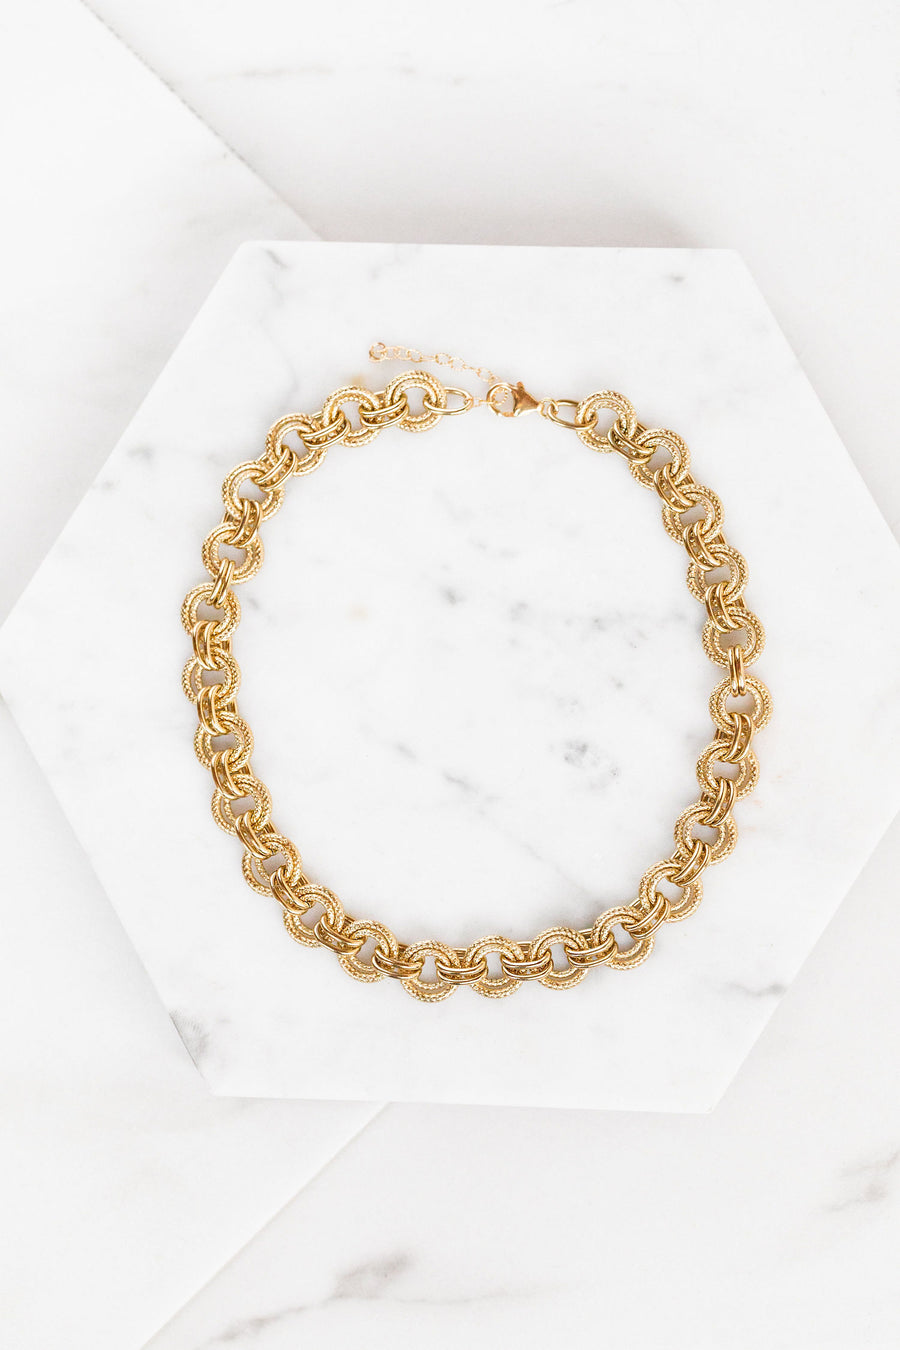 Find the perfect necklace you're looking for from Charme Silkiner! This beautiful chunky 14K Gold Overlay Necklace with amazing textured detail is pure perfection. Great for layering or wearing alone the Blaine Necklace is the perfect piece of unique jewelry that everyone should own. 